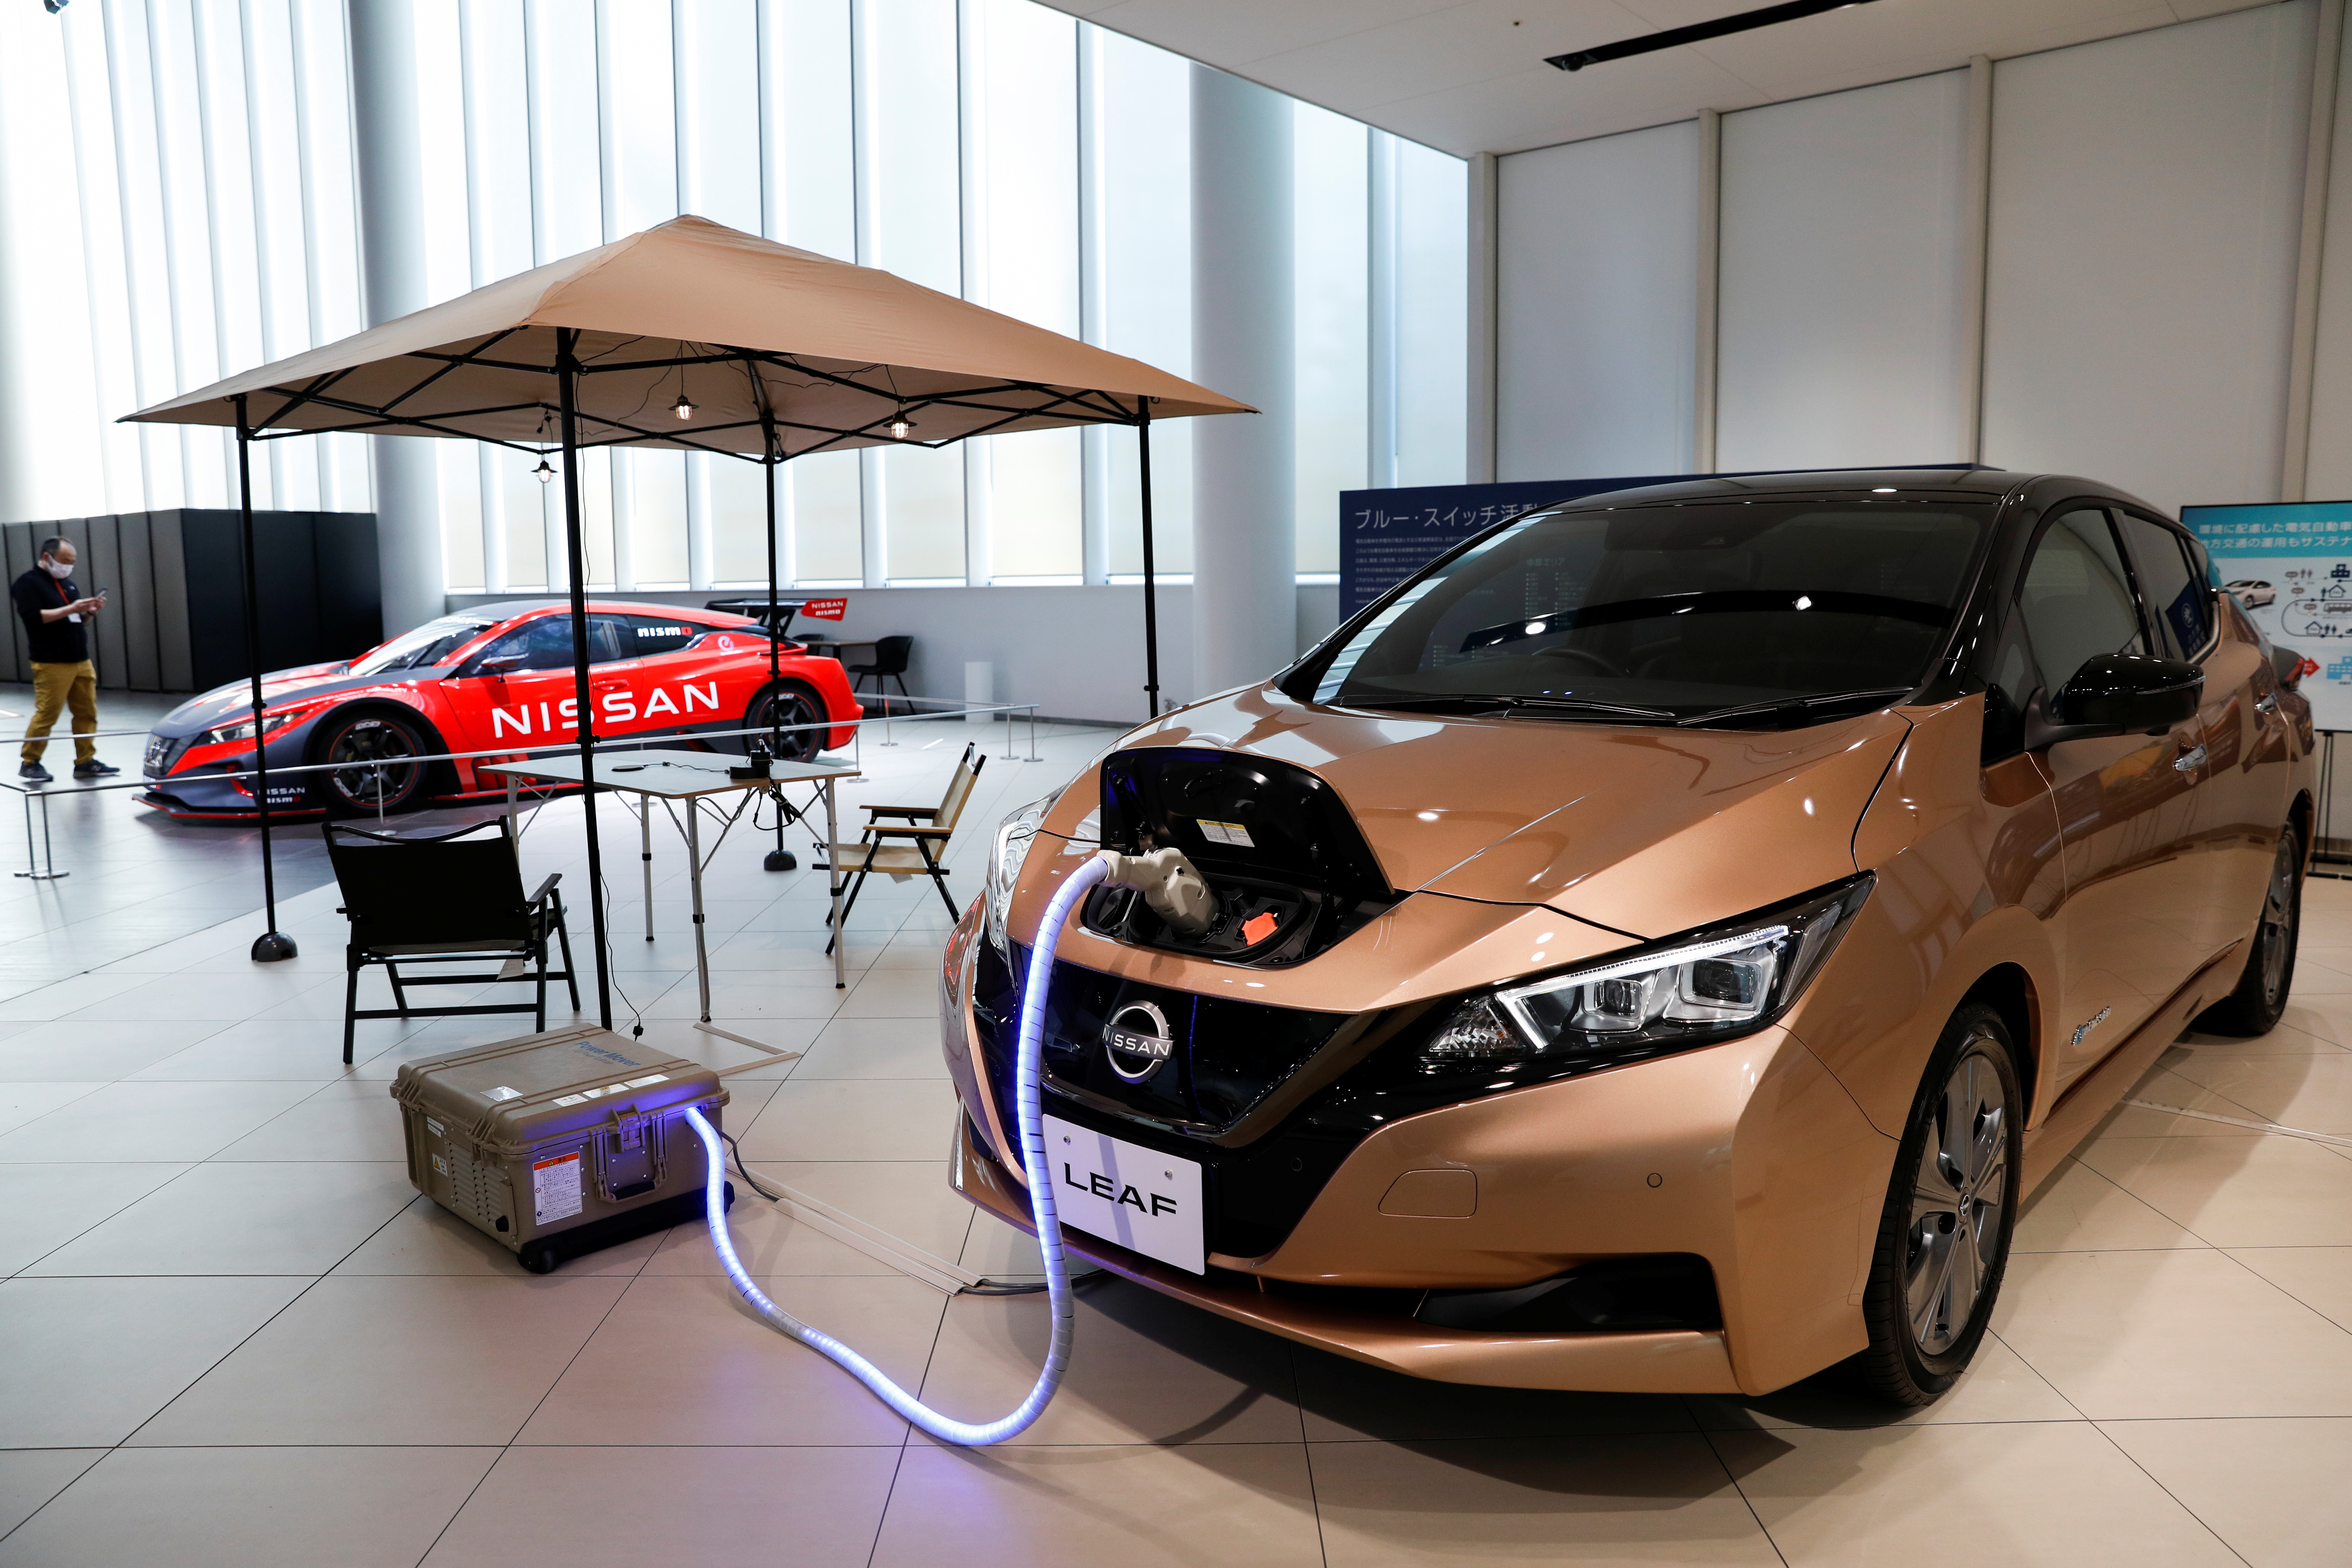 Leaf EV car and portable battery on display at Nissan Gallery in Yokohama